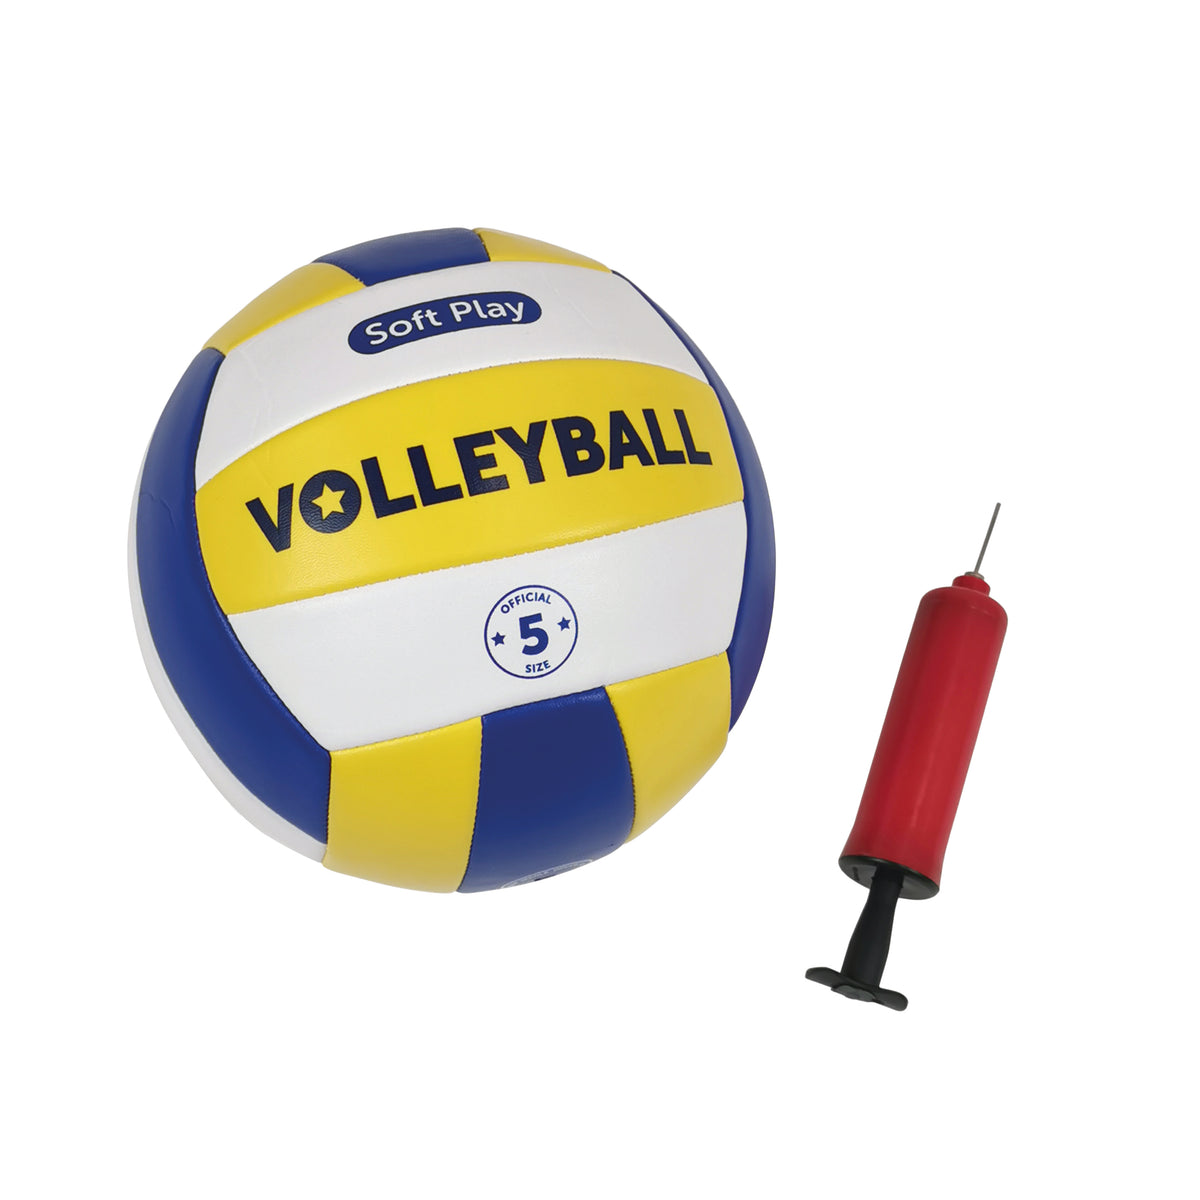 Volleyball Coaching Set with 5m Nets